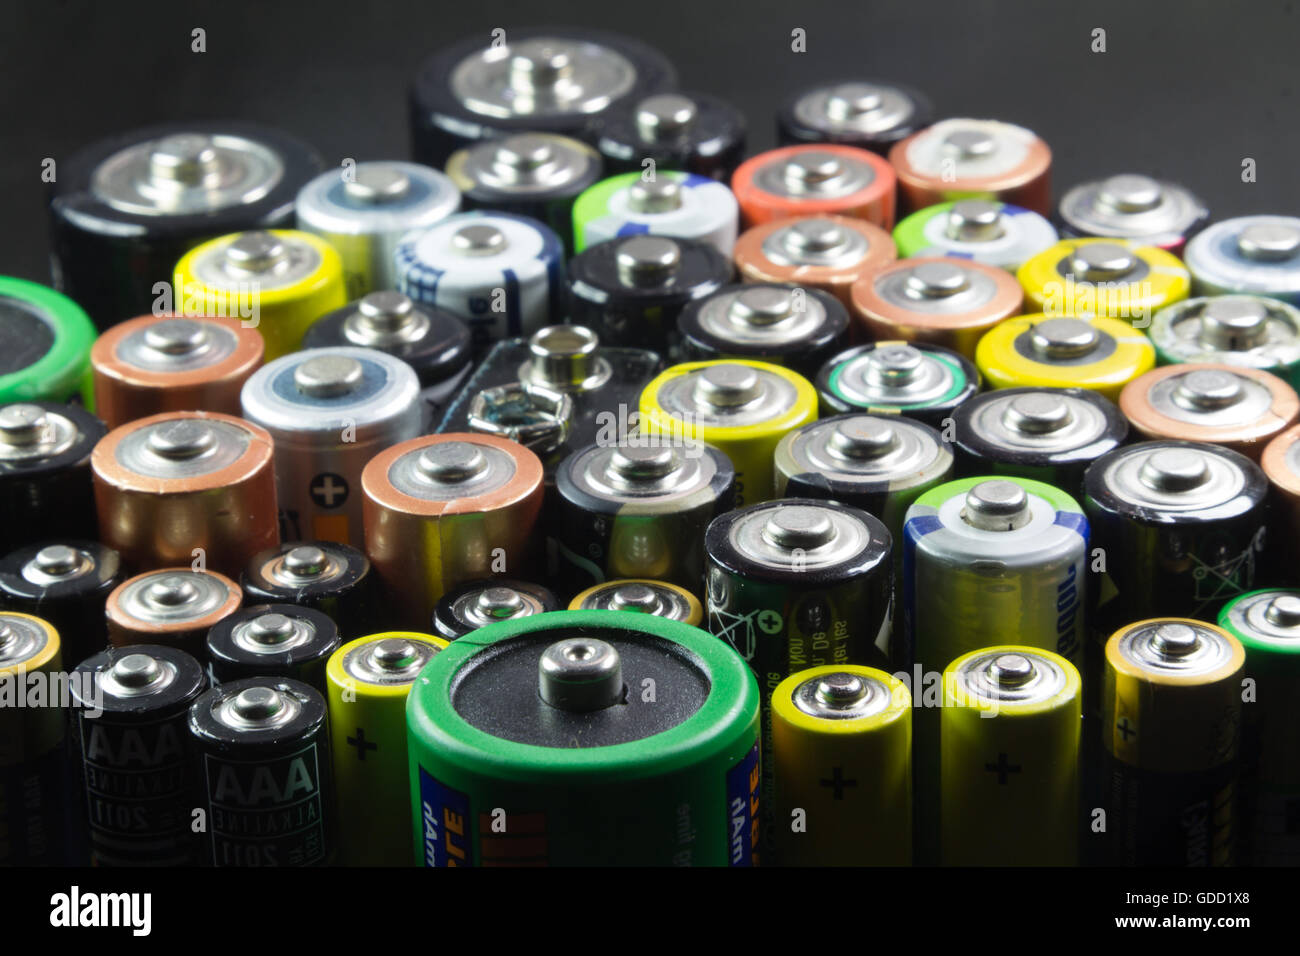 Batteries of different types and colors Stock Photo